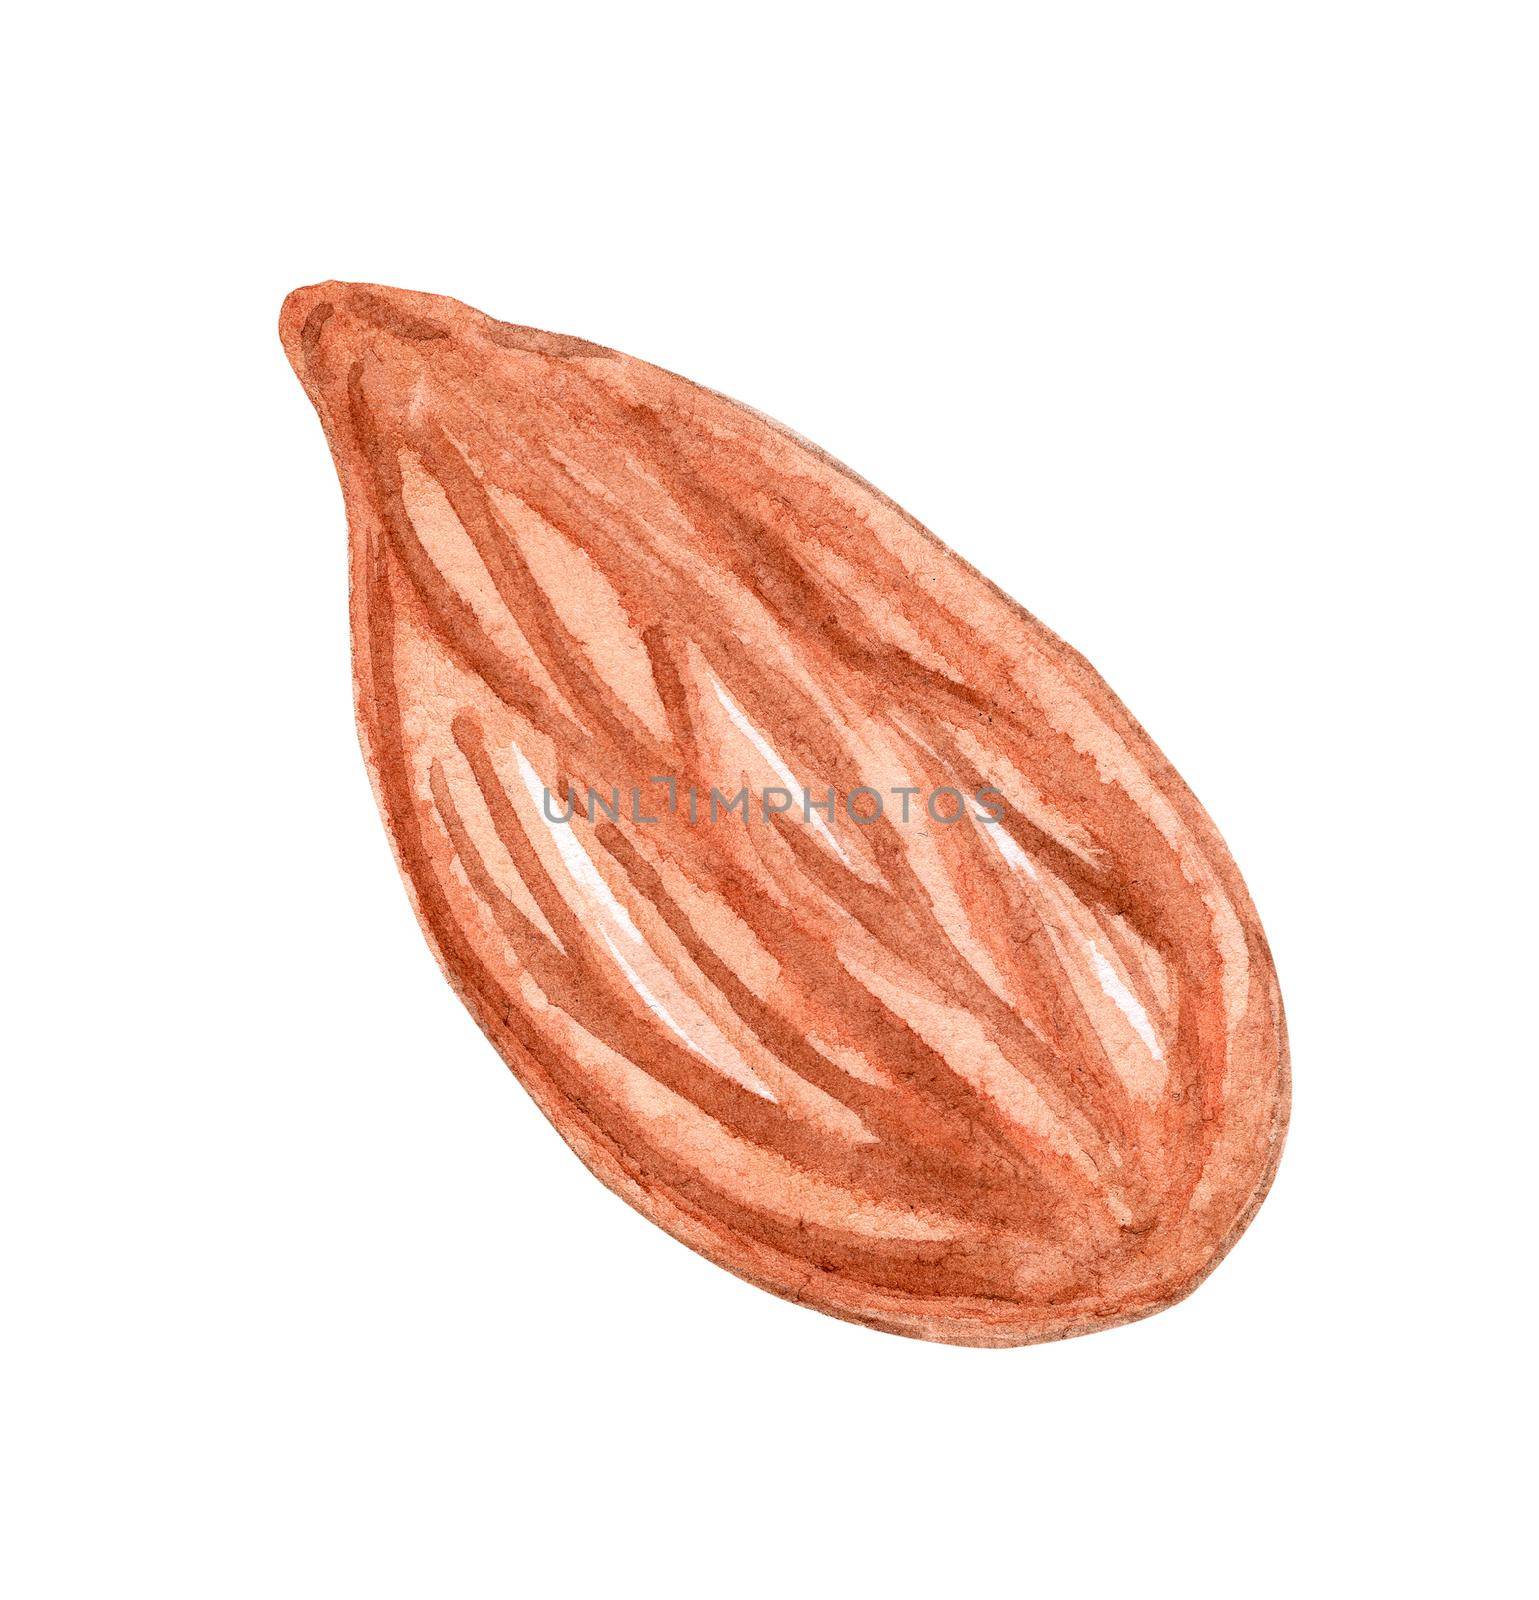 watercolor almond nut without shell isolated on white background by dreamloud